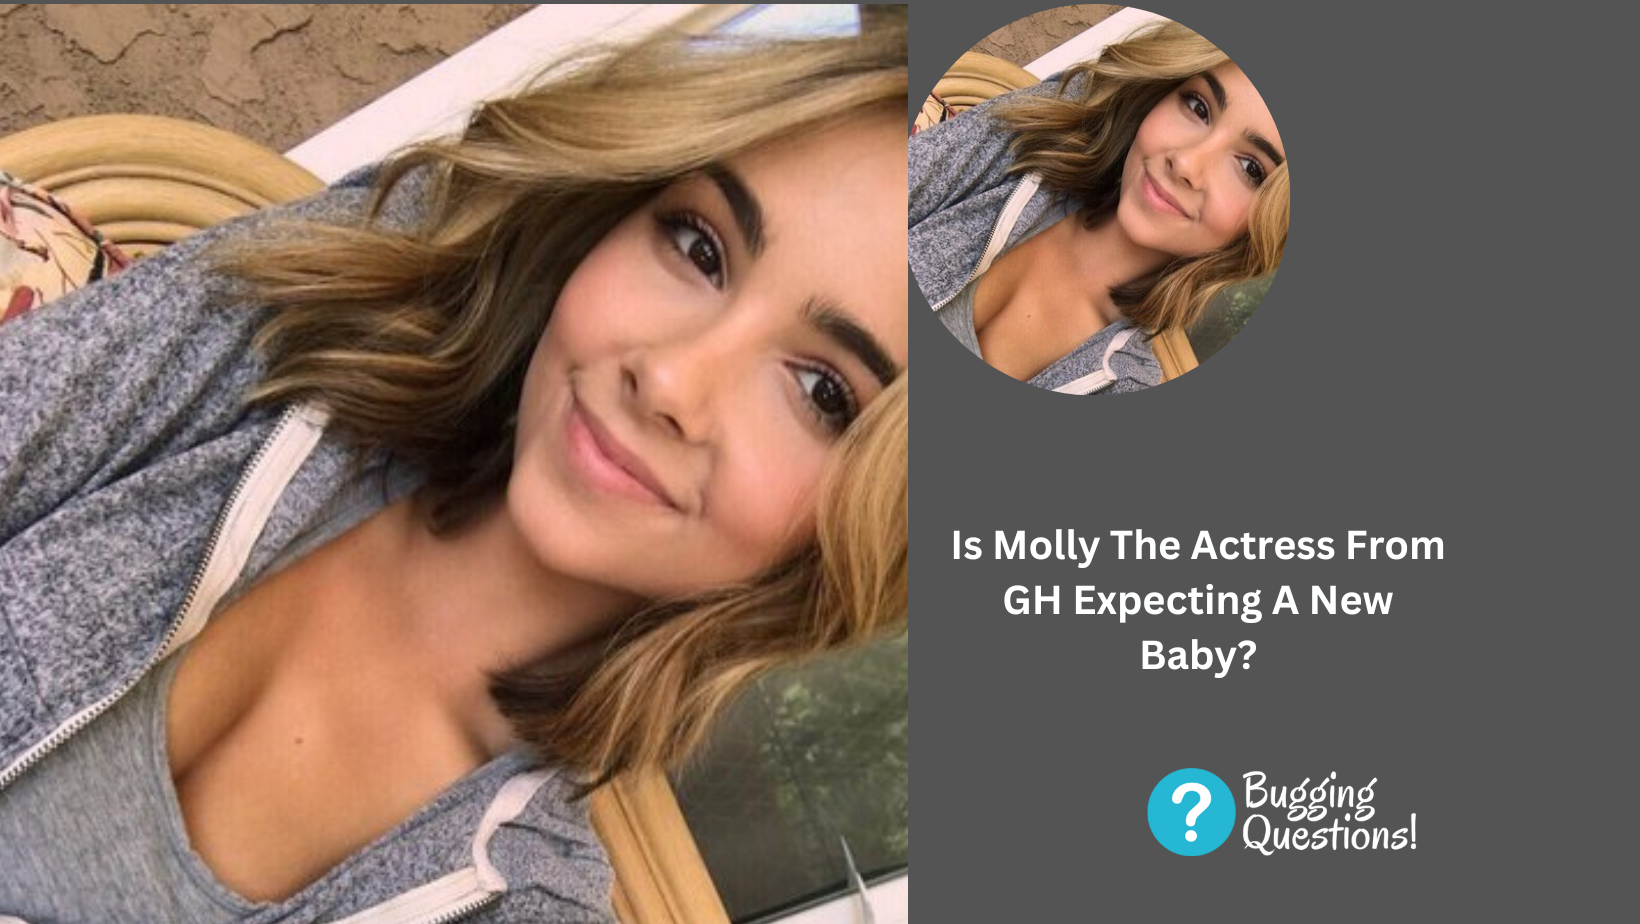 Is Molly The Actress From GH Expecting A New Baby?